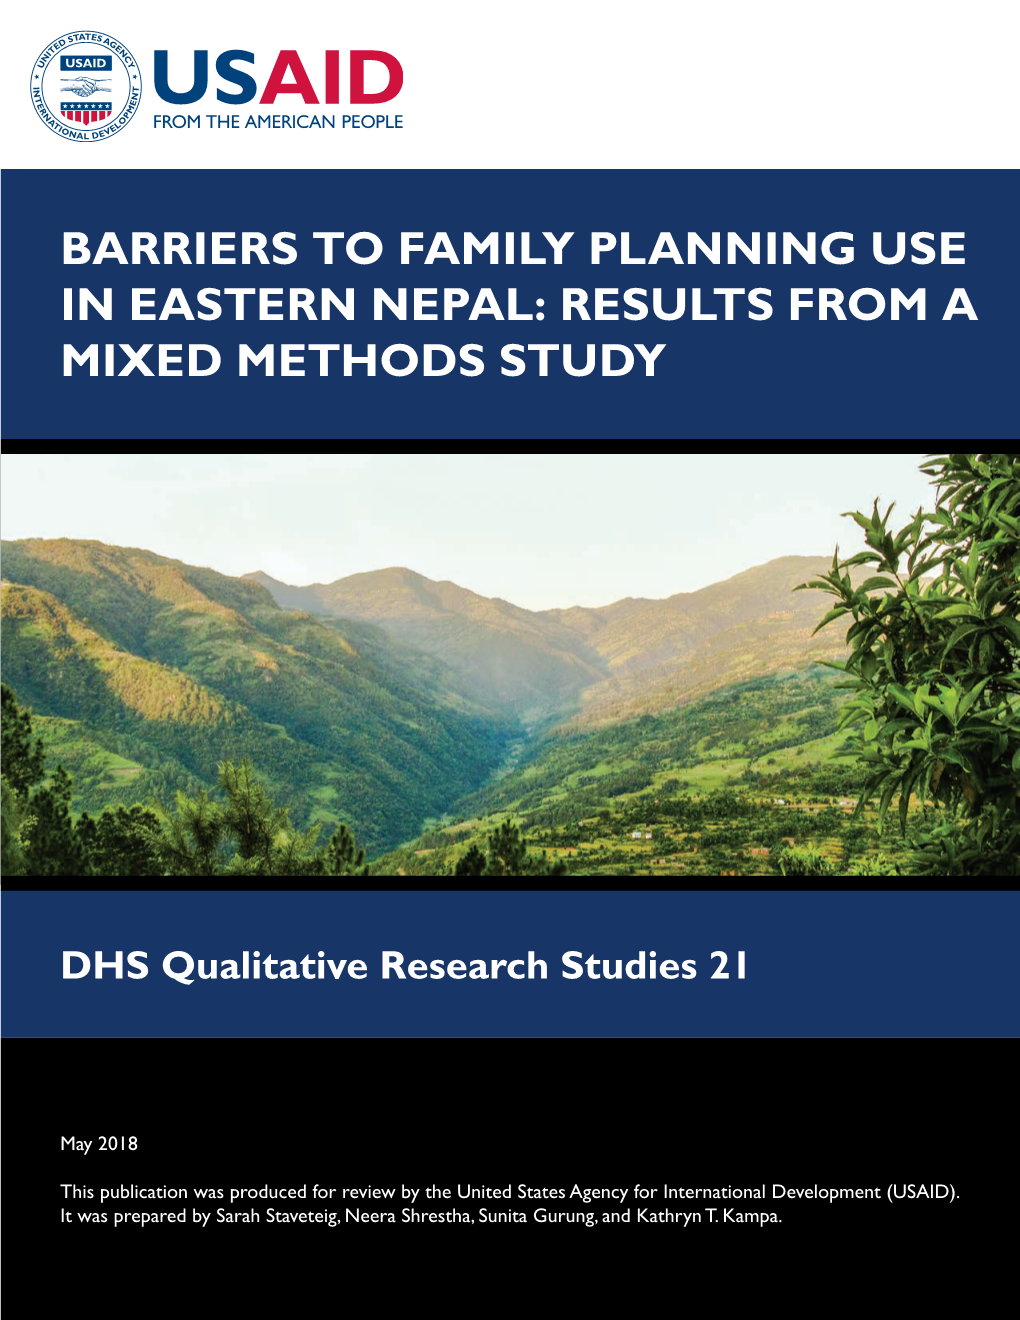 Barriers to Family Planning Use in Eastern Nepal: Results from a Mixed Methods Study